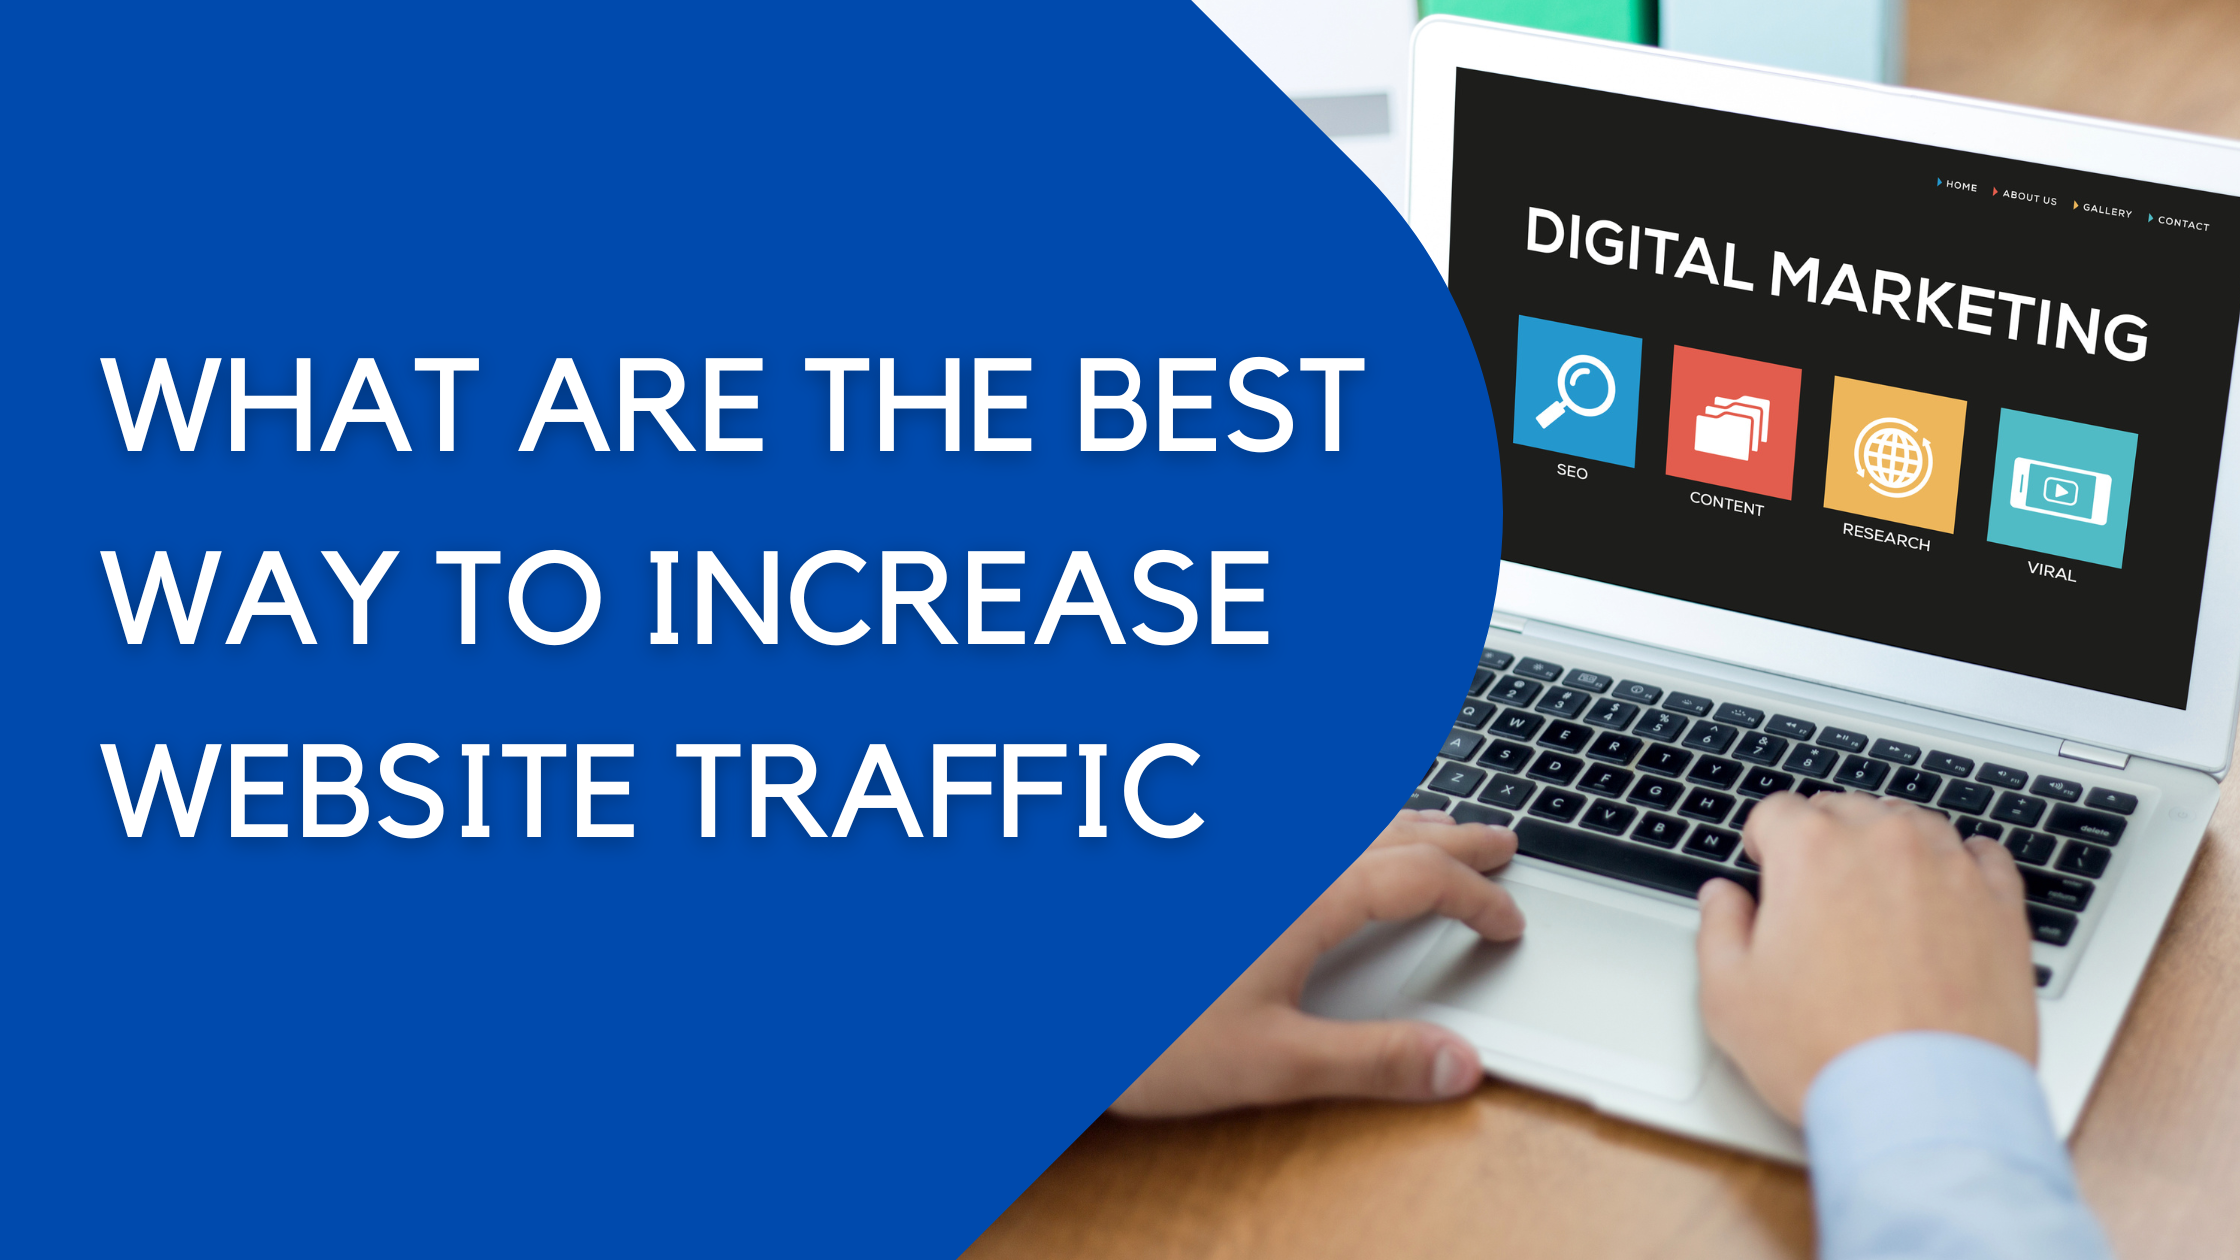    What are the best way to increase website traffic